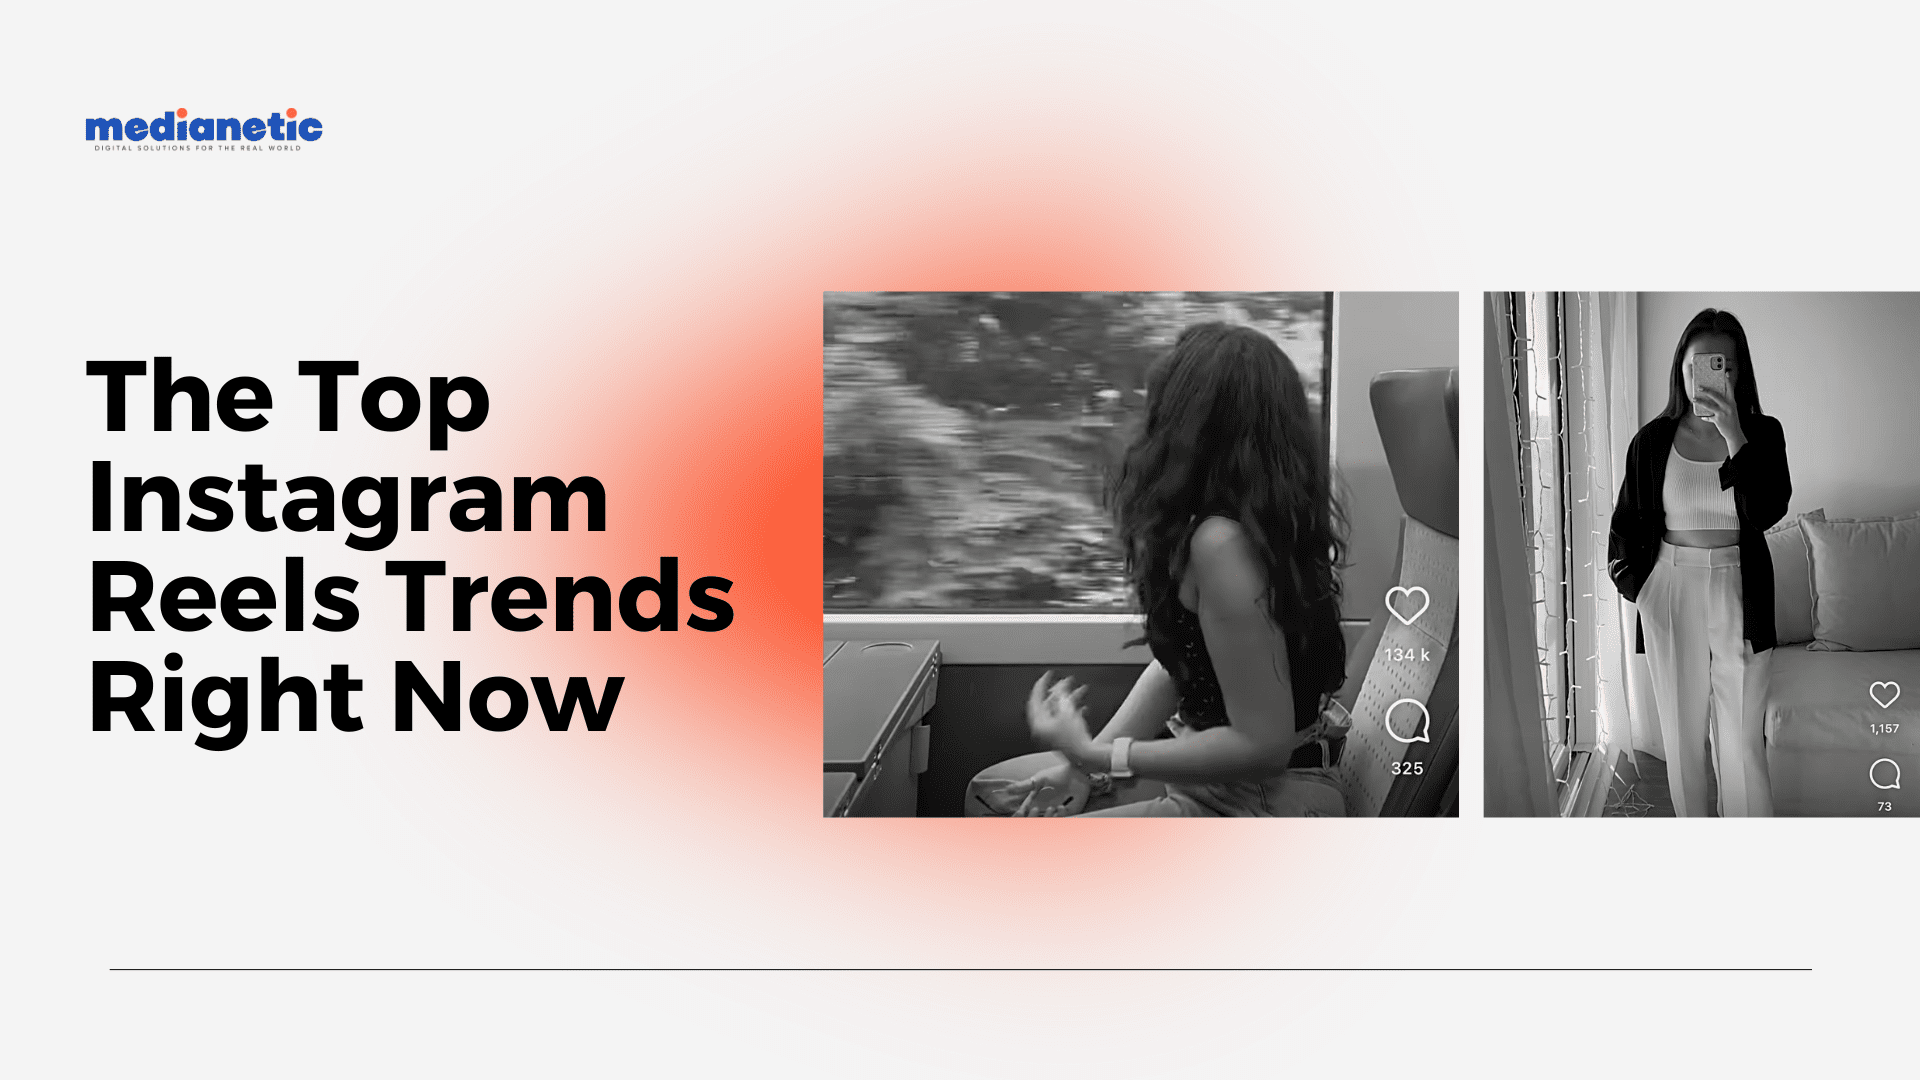 The Top Instagram Reels Trends Right Now